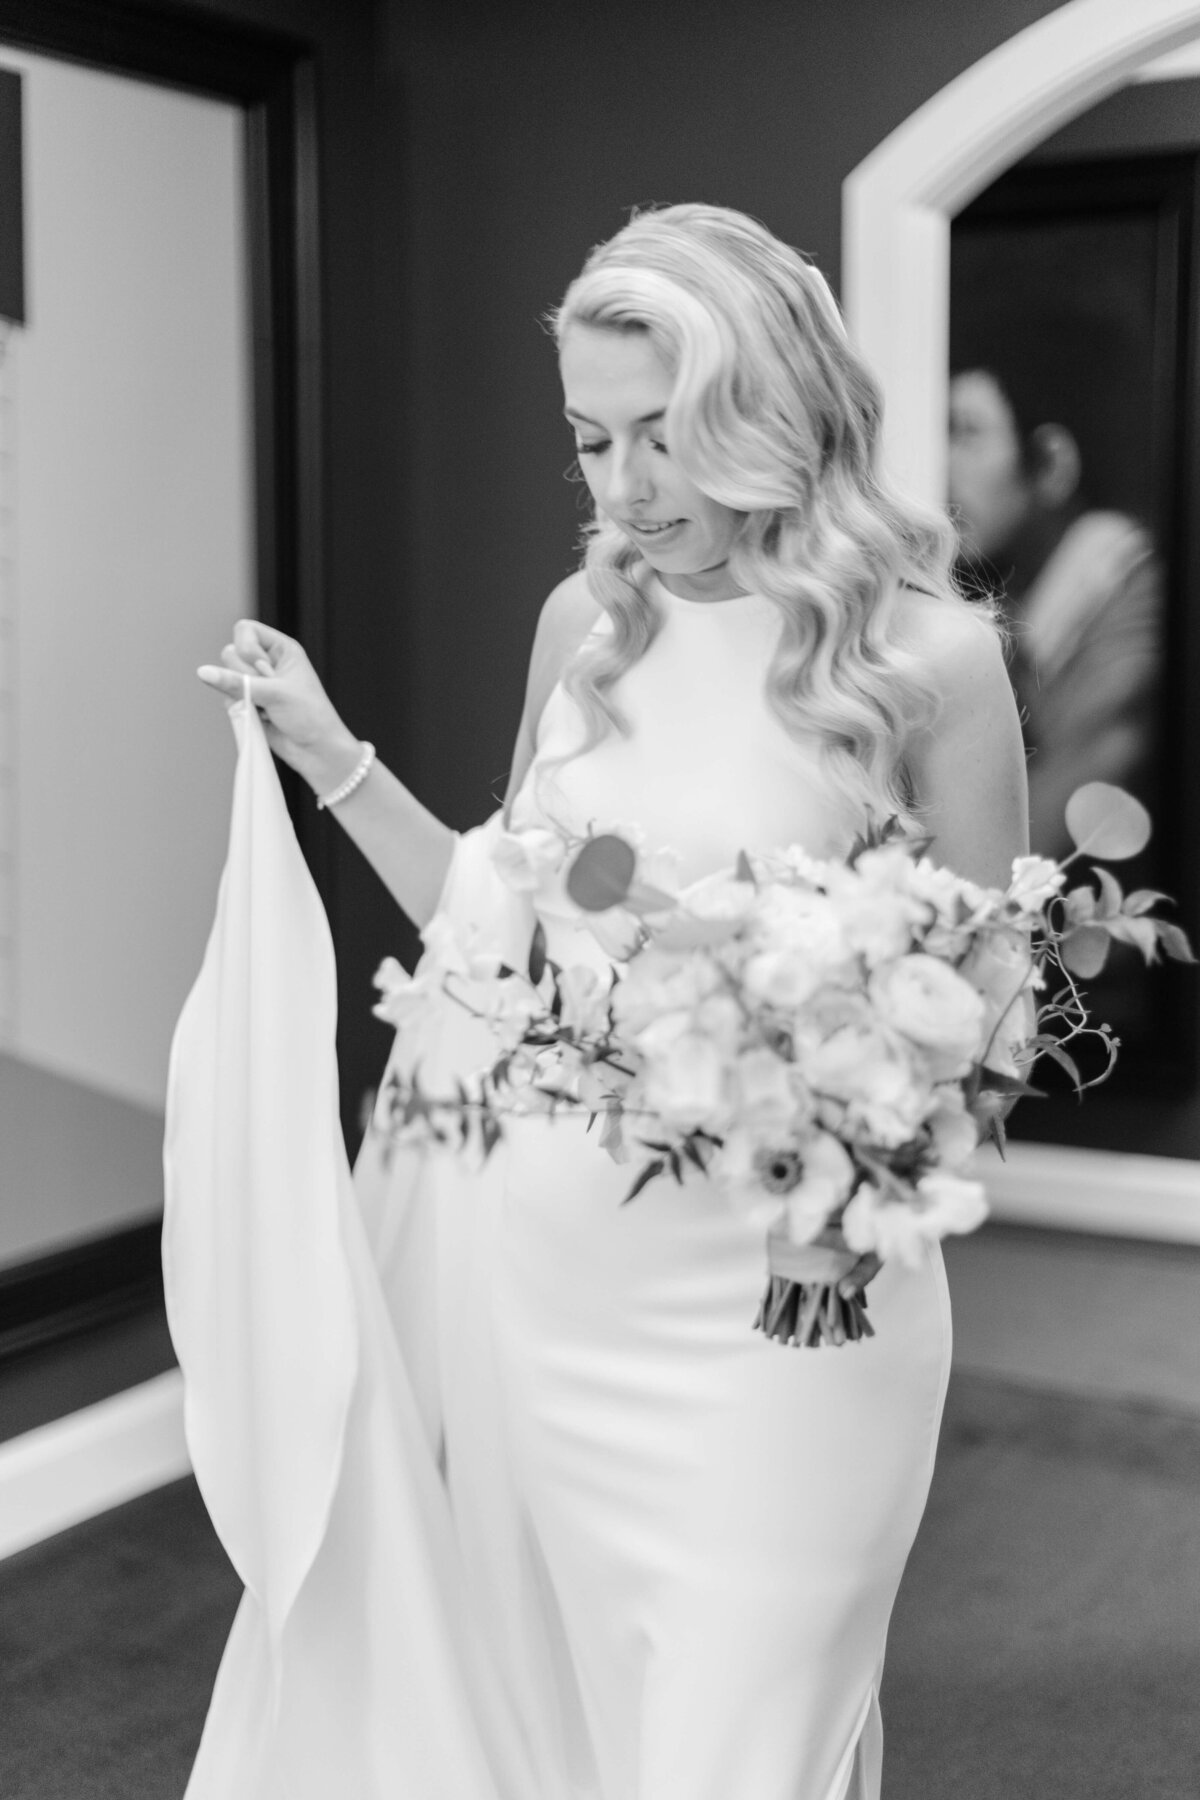 A bride walks while holding flowers.